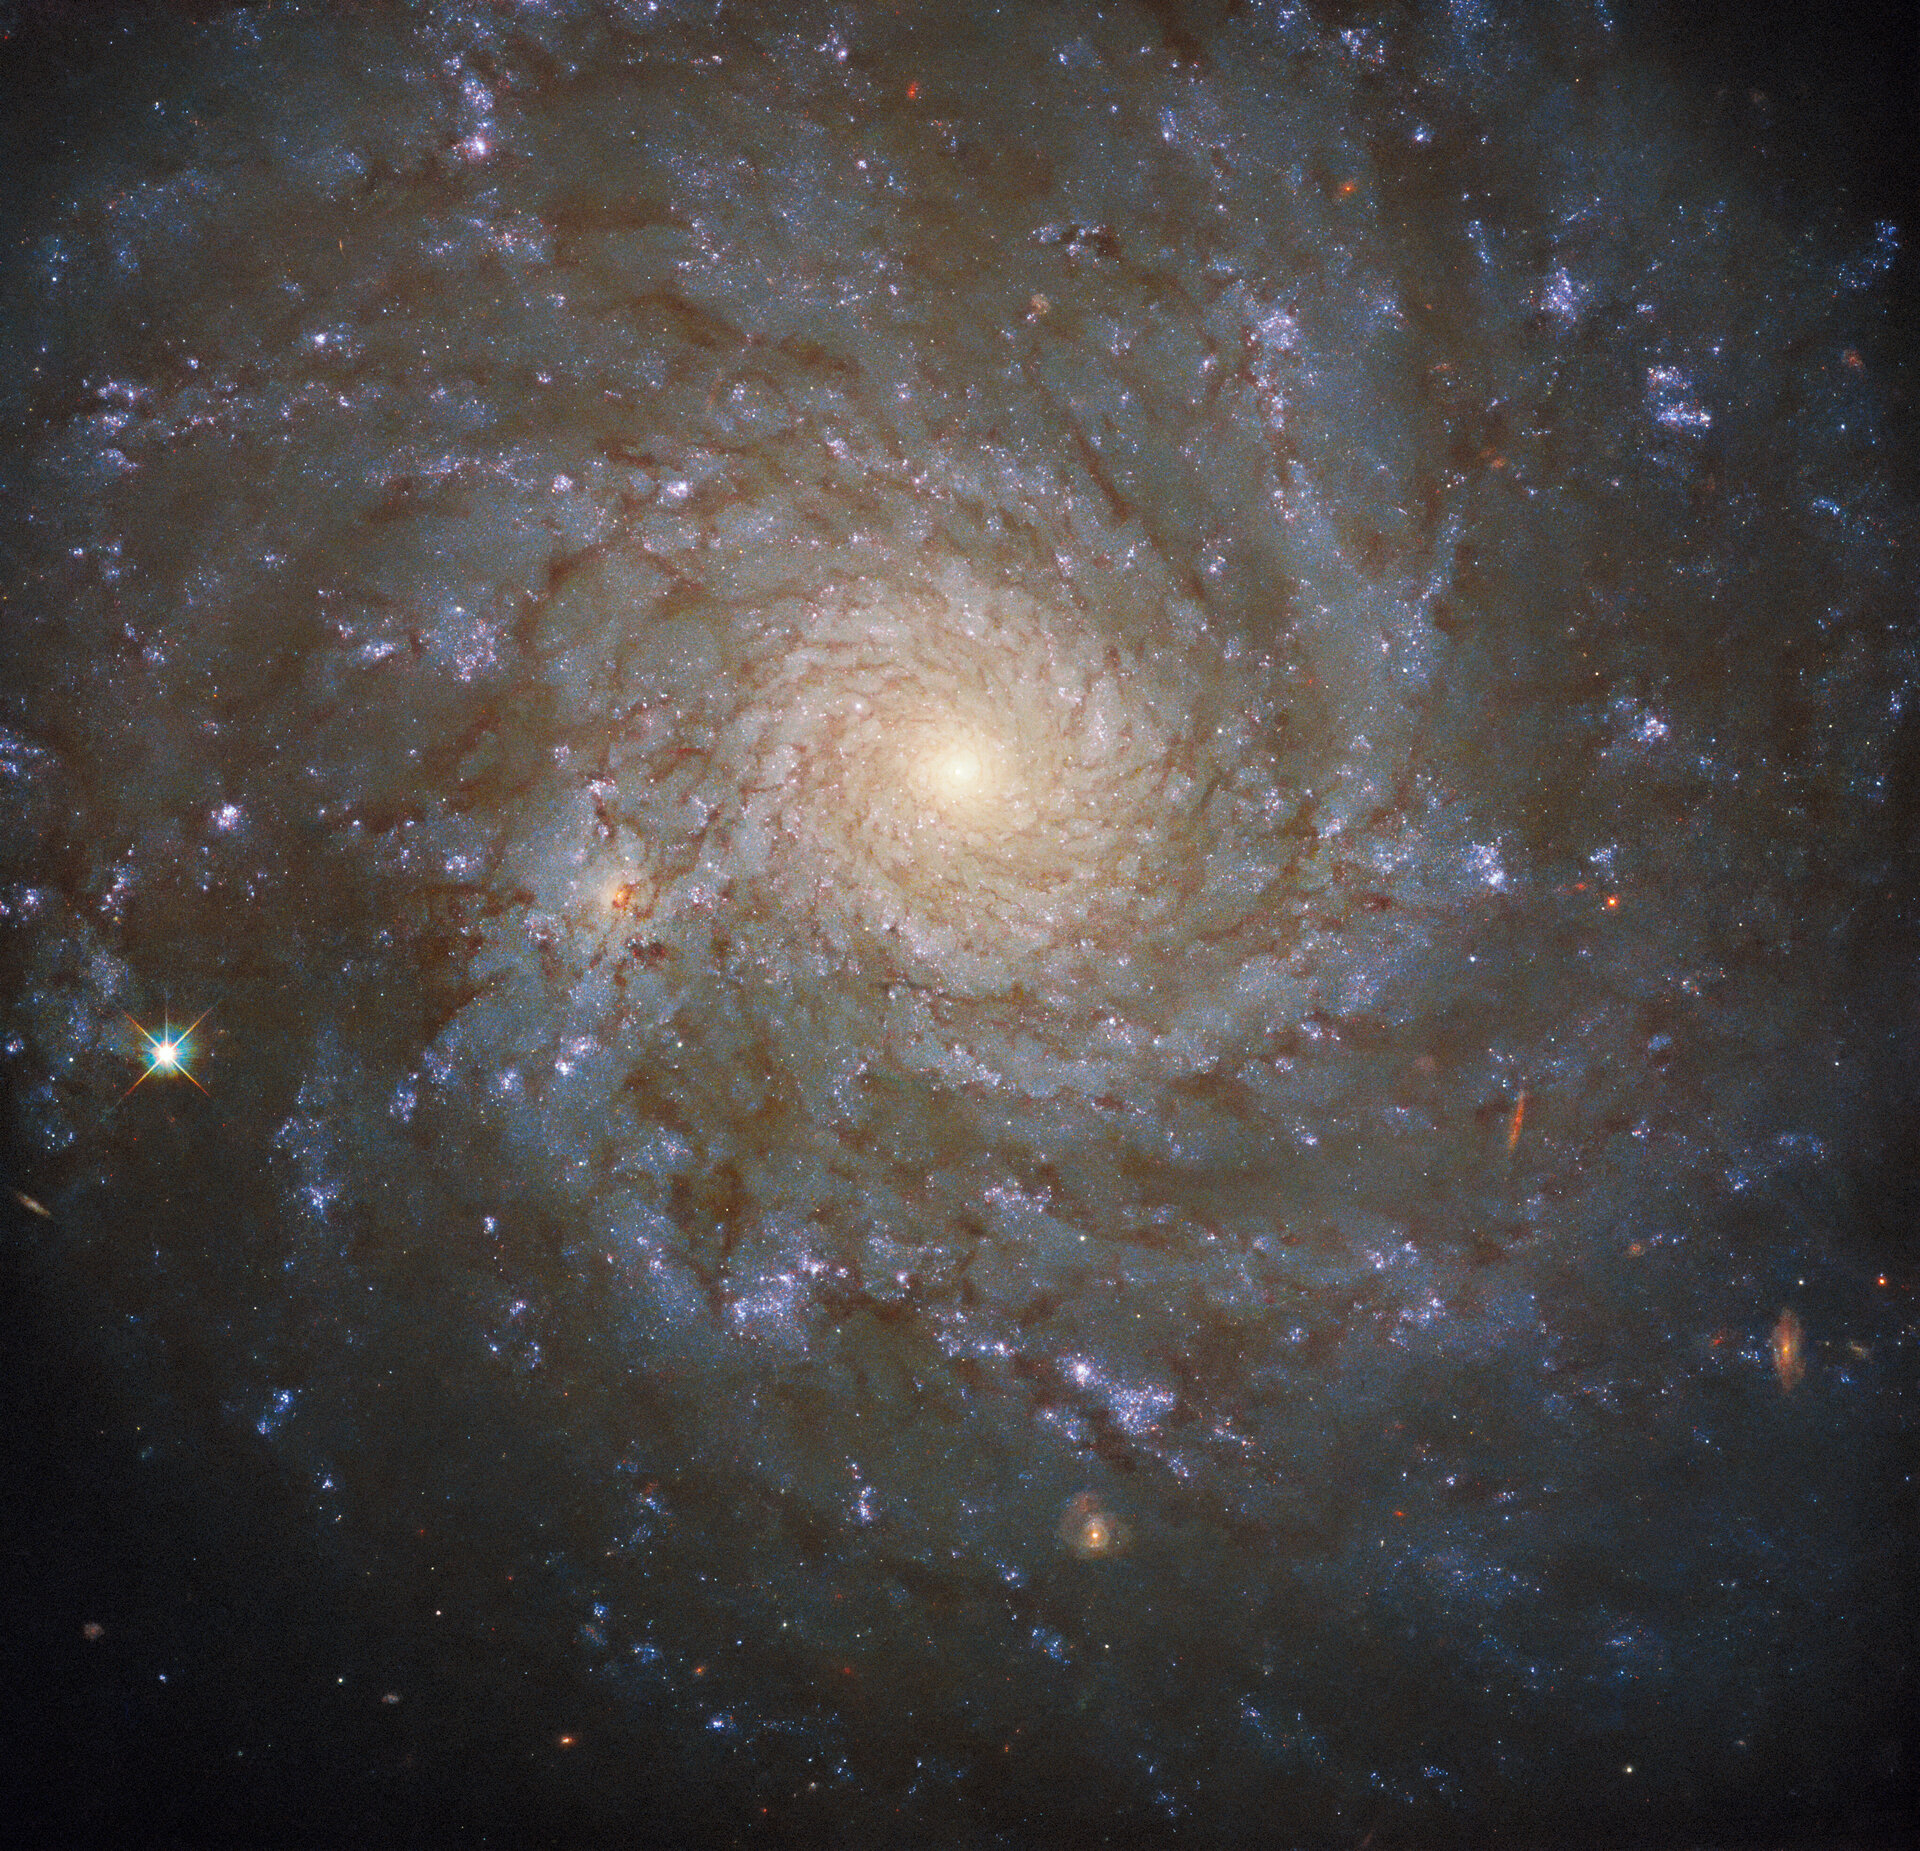 Hubble spies a stunning spiral